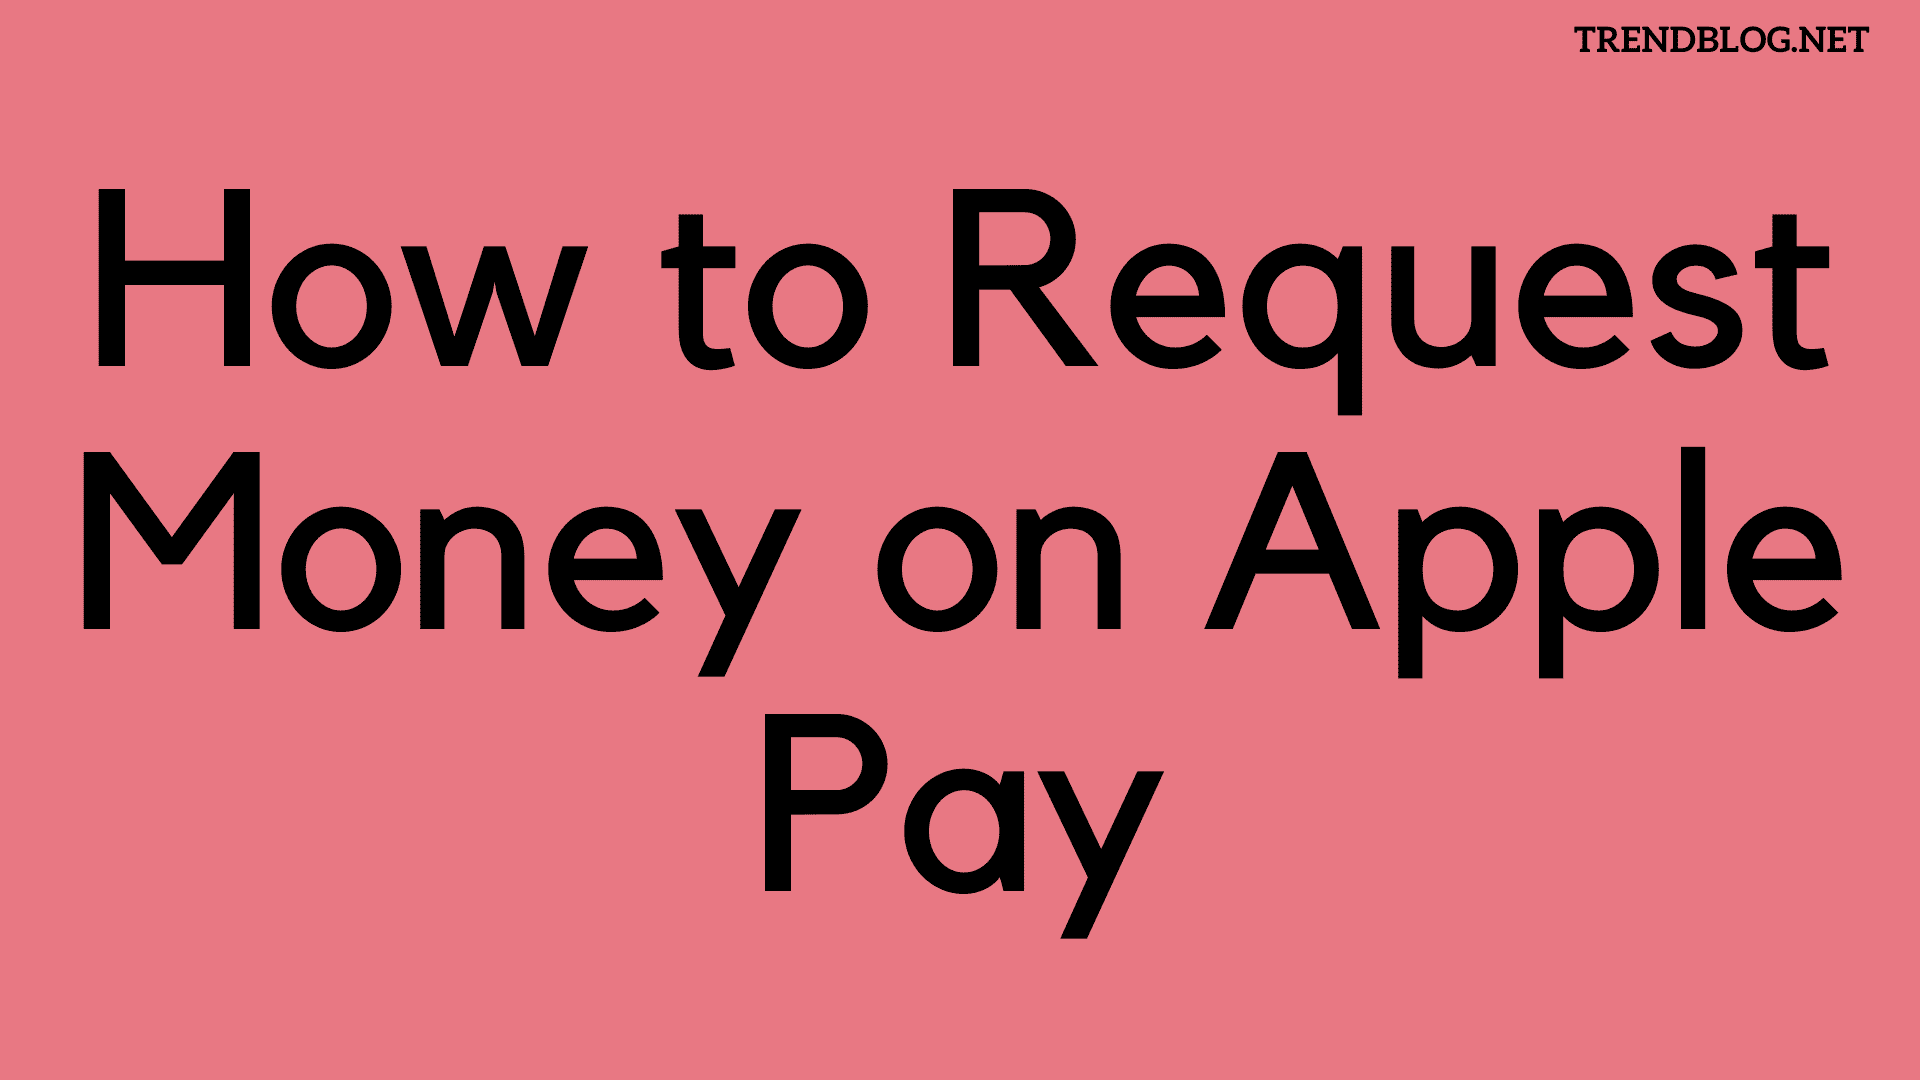  How to Request Money on Apple Pay Using iPhone, Apple Watch